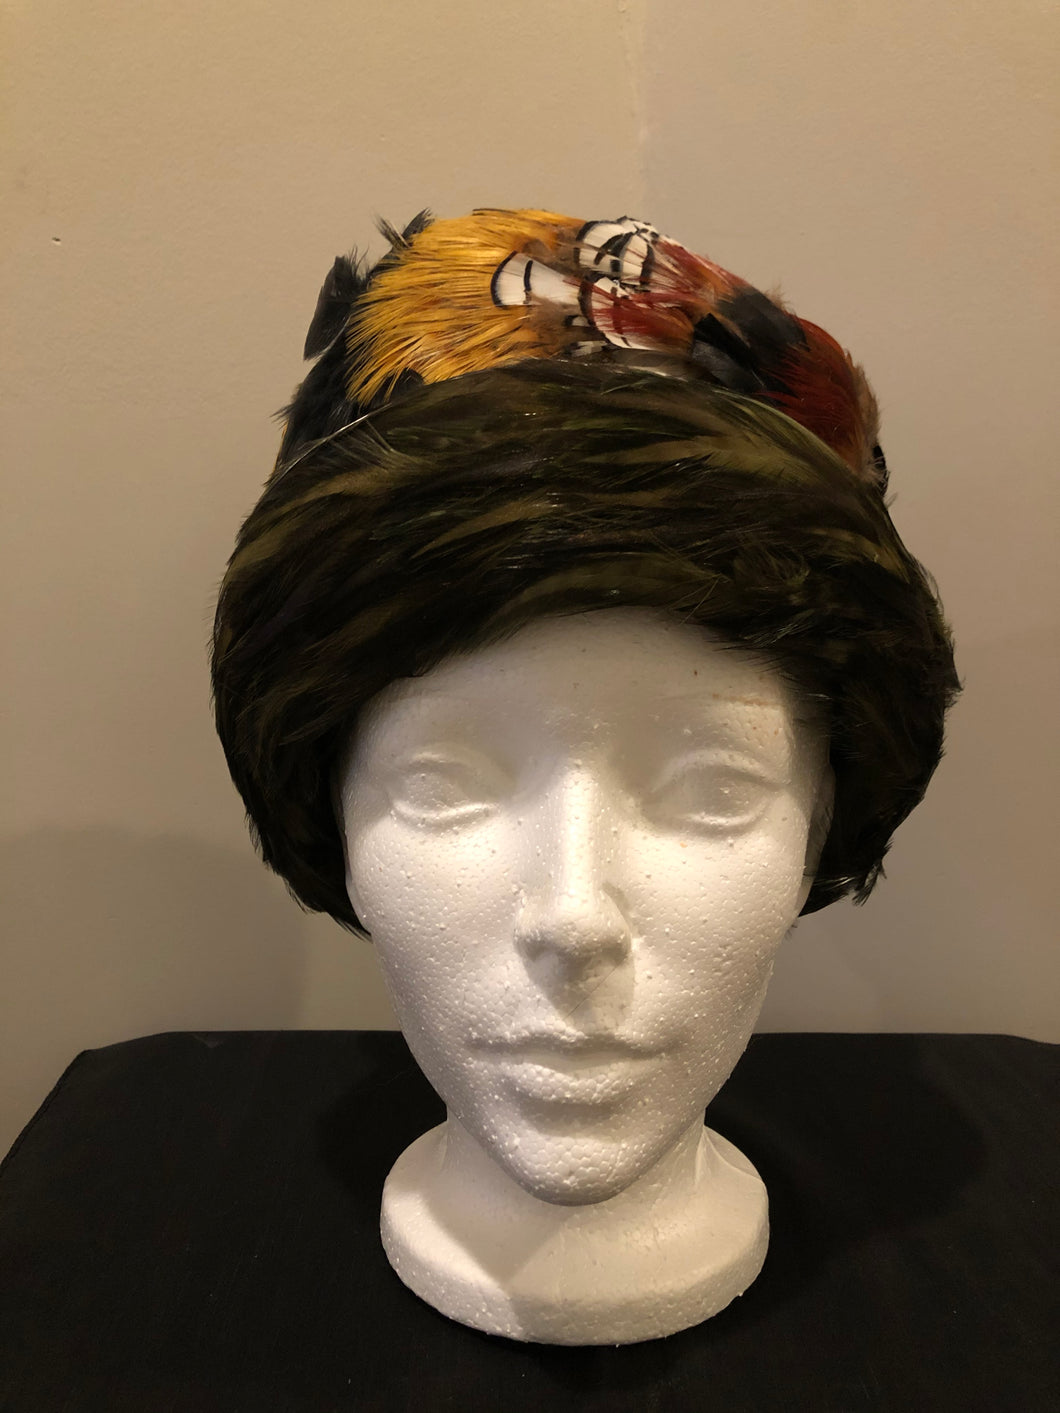 Kingspier Vintage - Jacqueline Fashion Hats green felt hat with red, orange, black and white feathers. Made in Toronto.

Circumference - 21”

Hat is in excellent vintage condition.